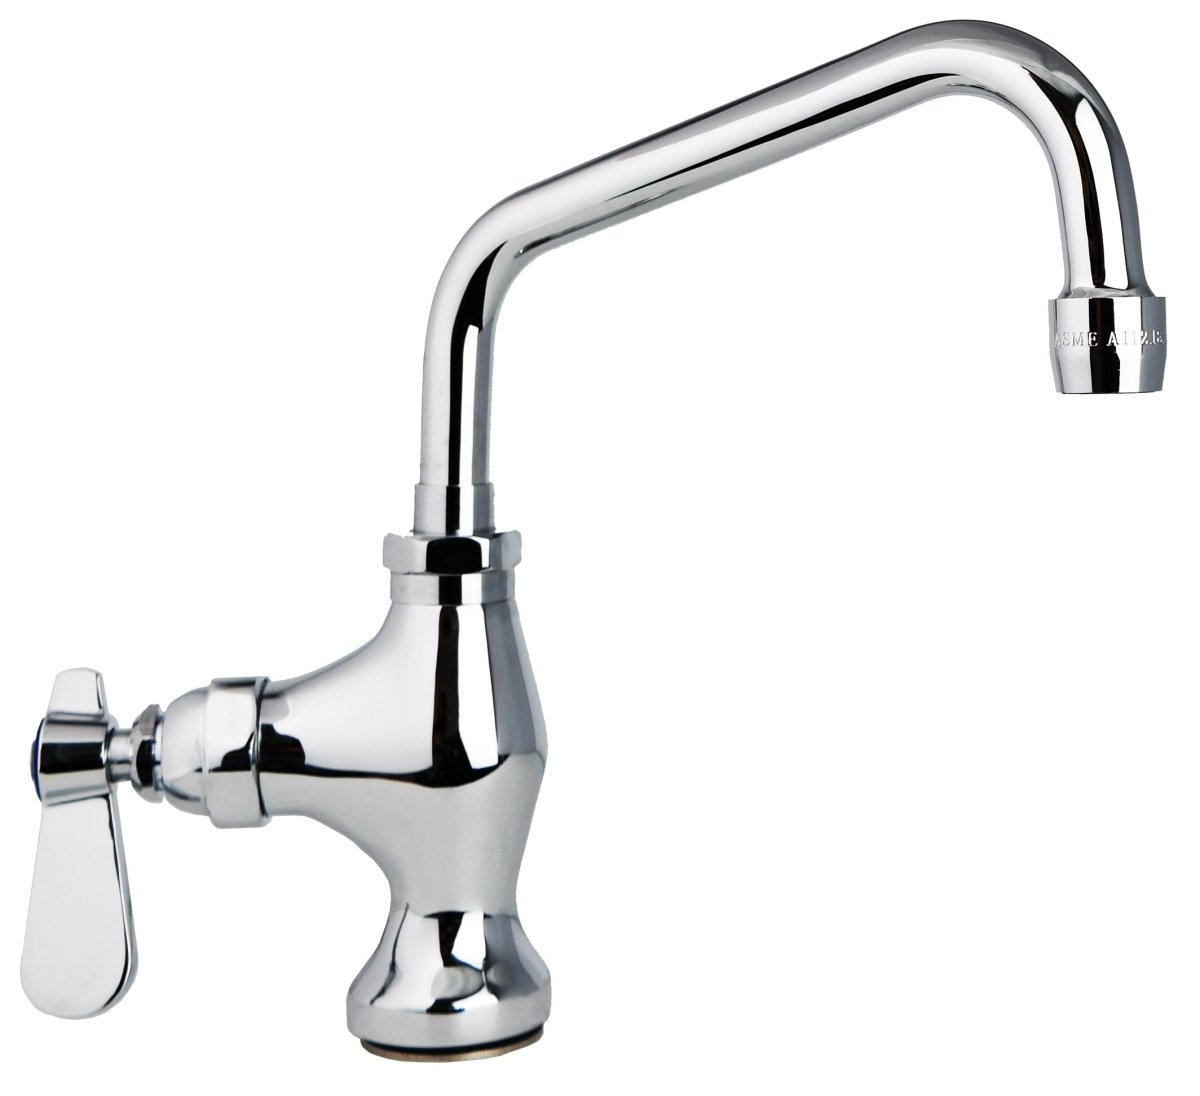 OHD112 - Single pedestal, Single feed Pantry Tap with 12" Spout - Oxford Hardware - OHD112